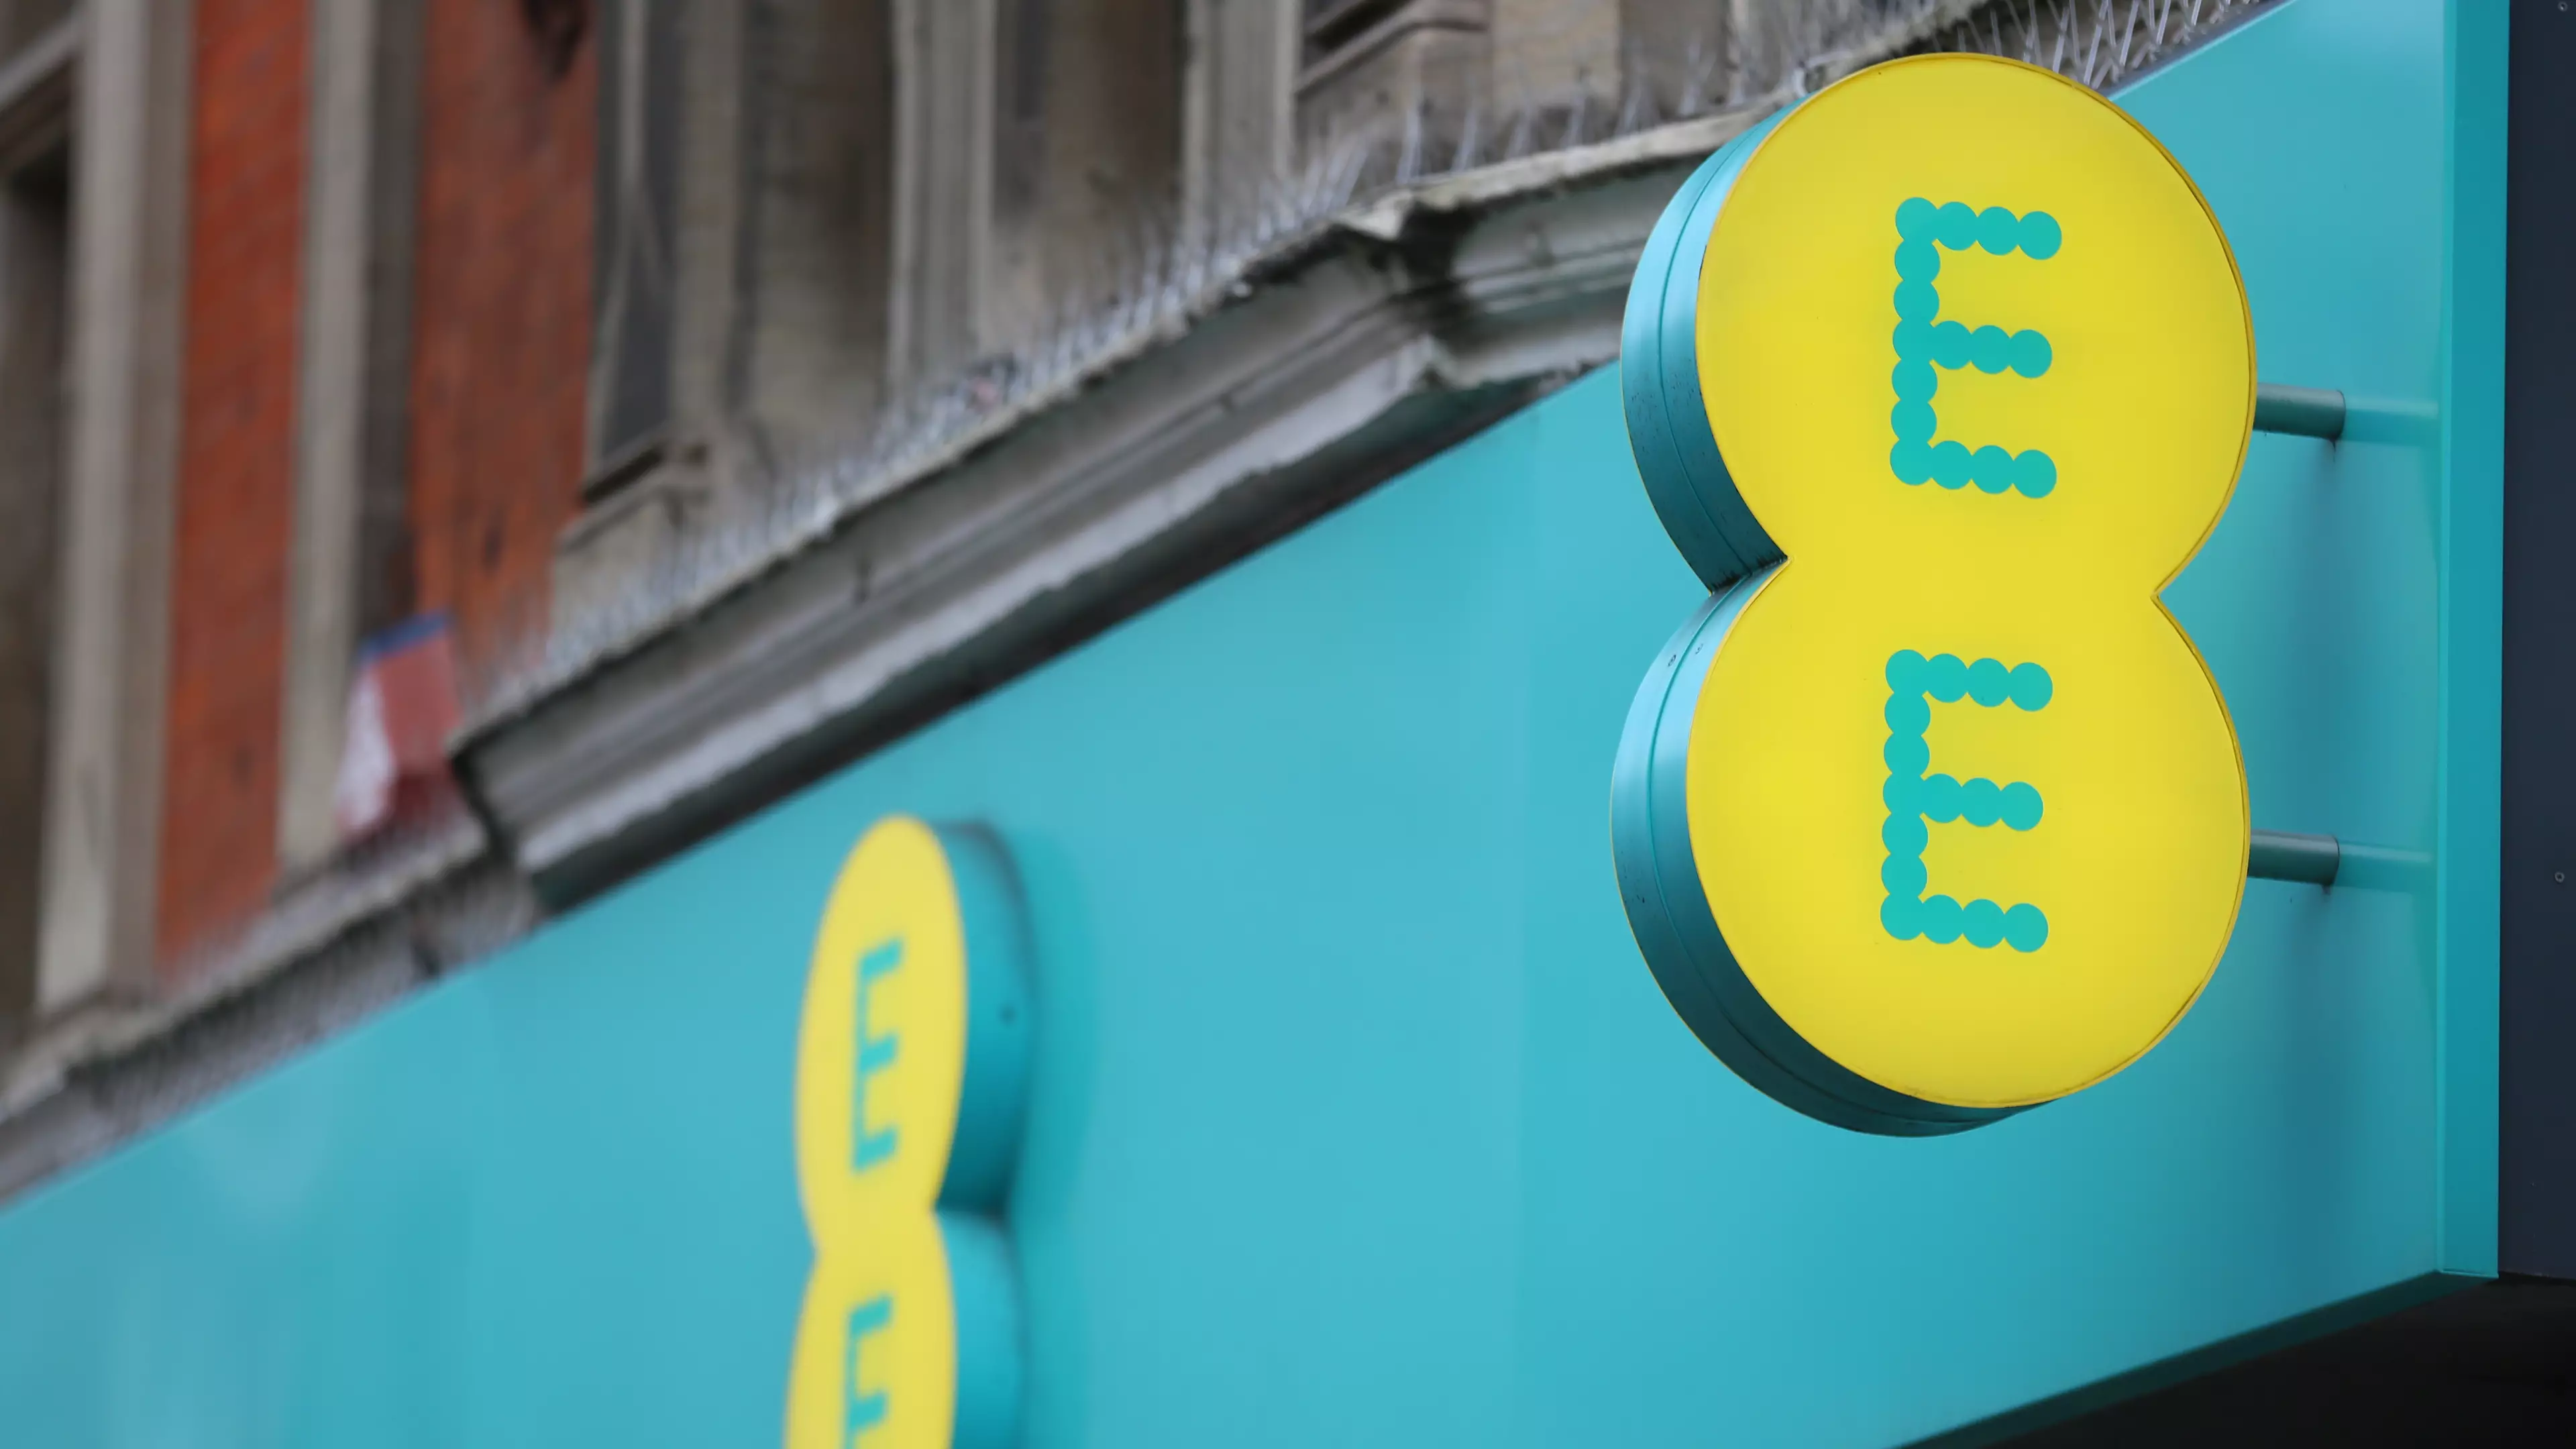 EE Brings Back EU Data Roaming Charges After Brexit